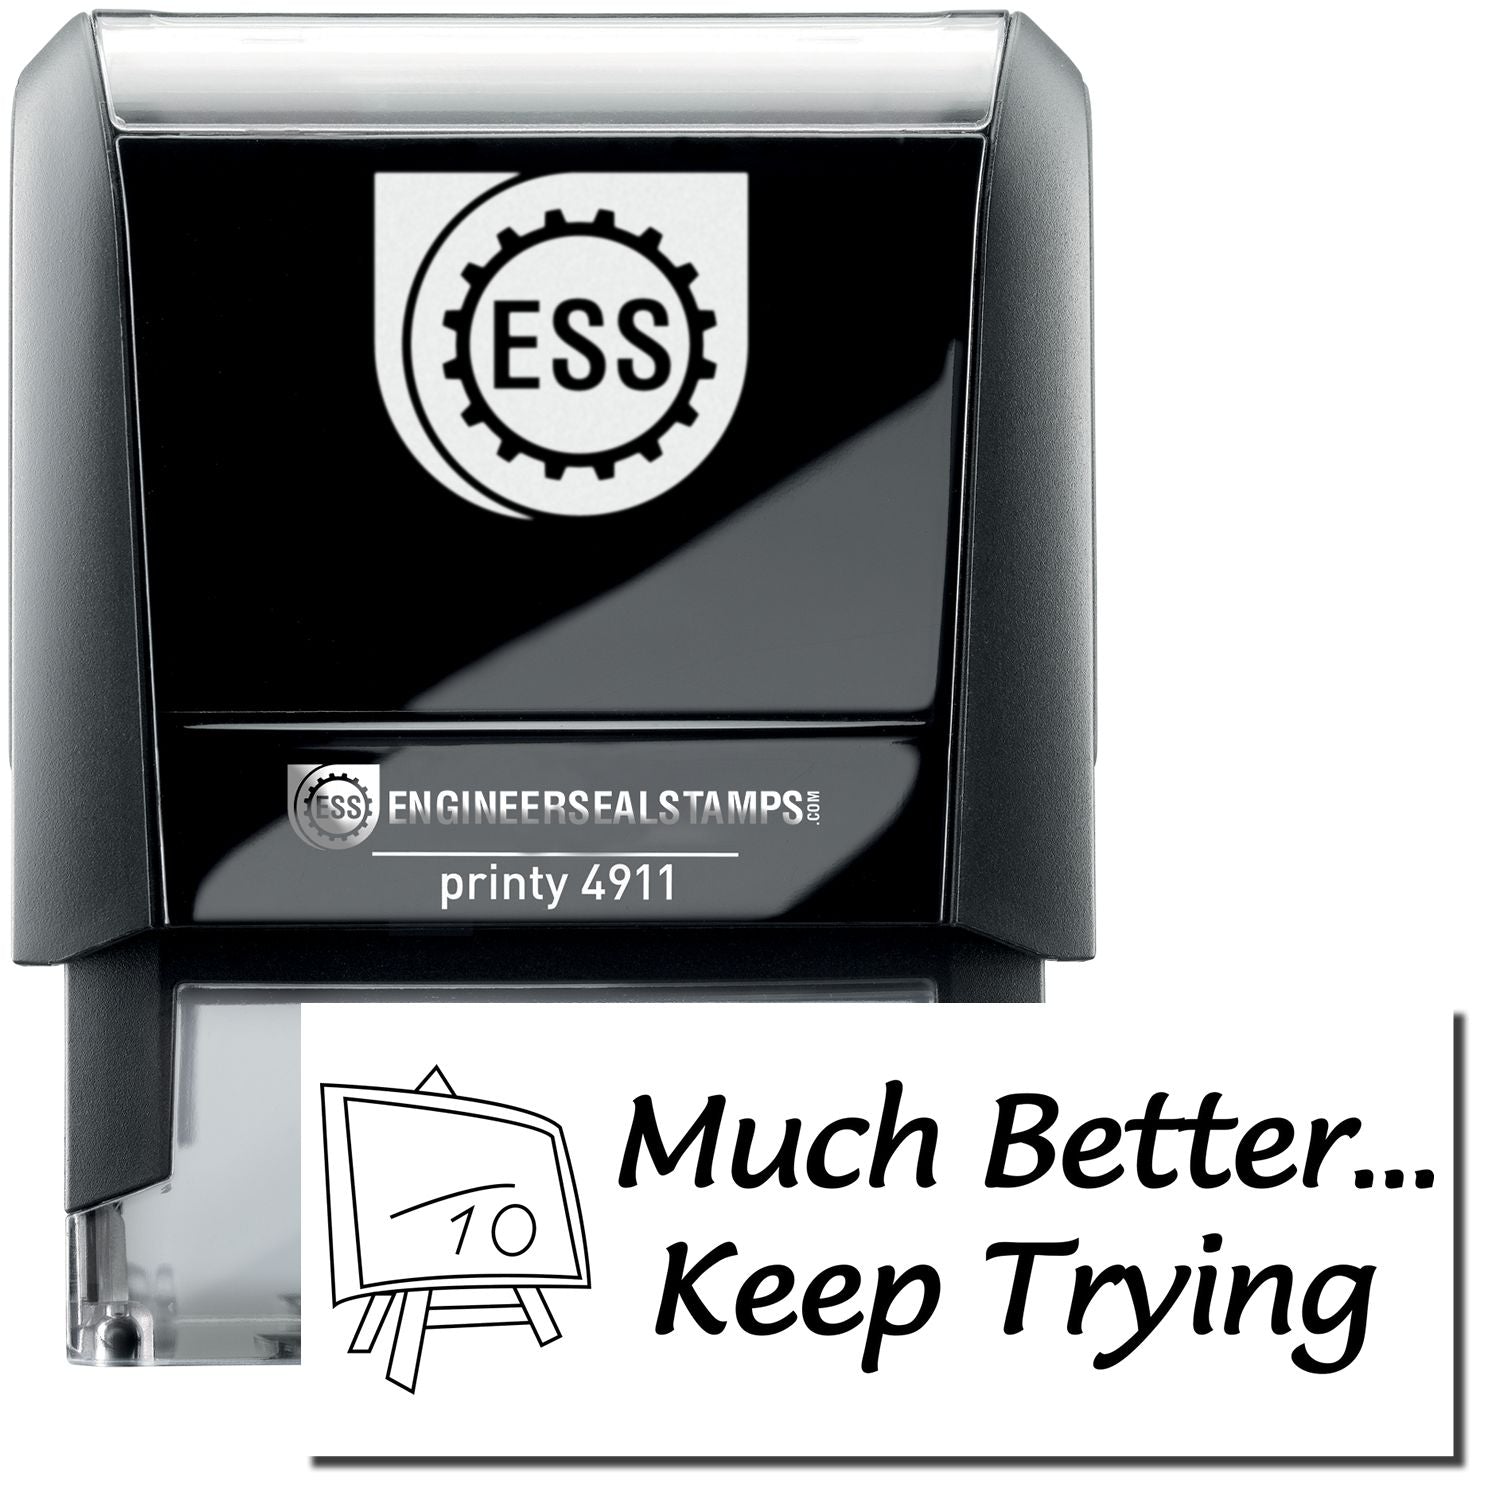 A self-inking stamp with a stamped image showing how the text "Much Better... Keep Trying" with an image showing a blackboard with a line over the number 10 is displayed after stamping.